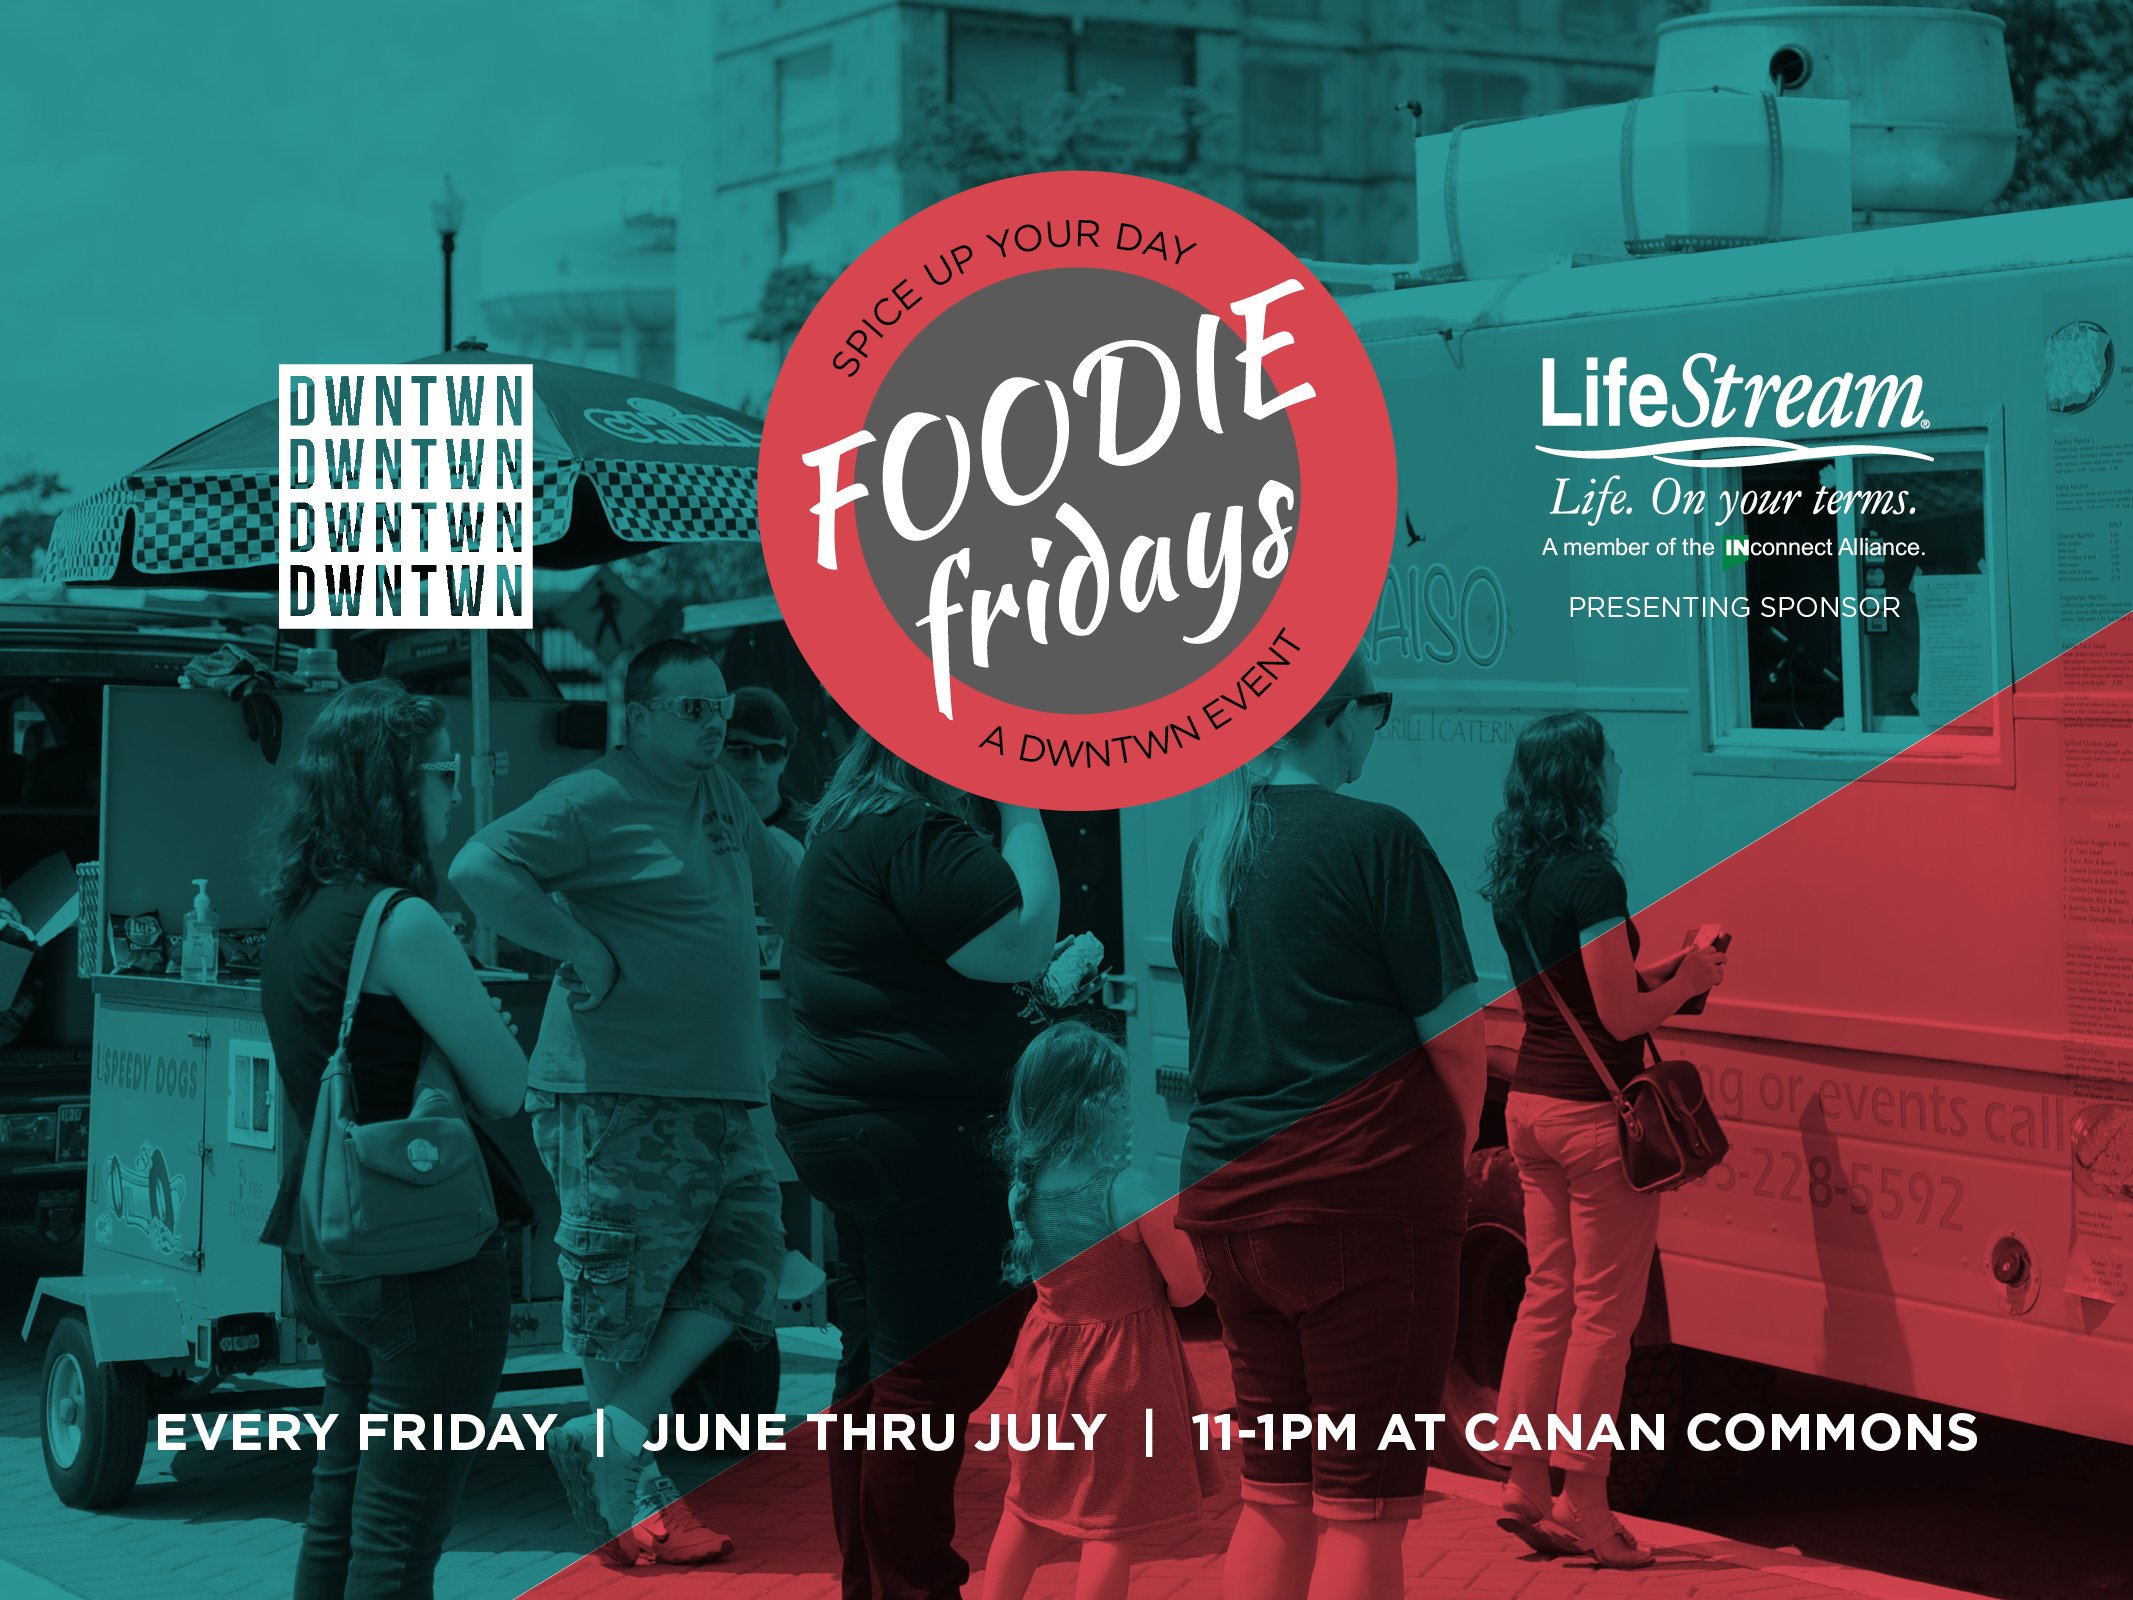 DWNTWN's Outdoor Lunch and Festivities Series, Foodie Fridays ...